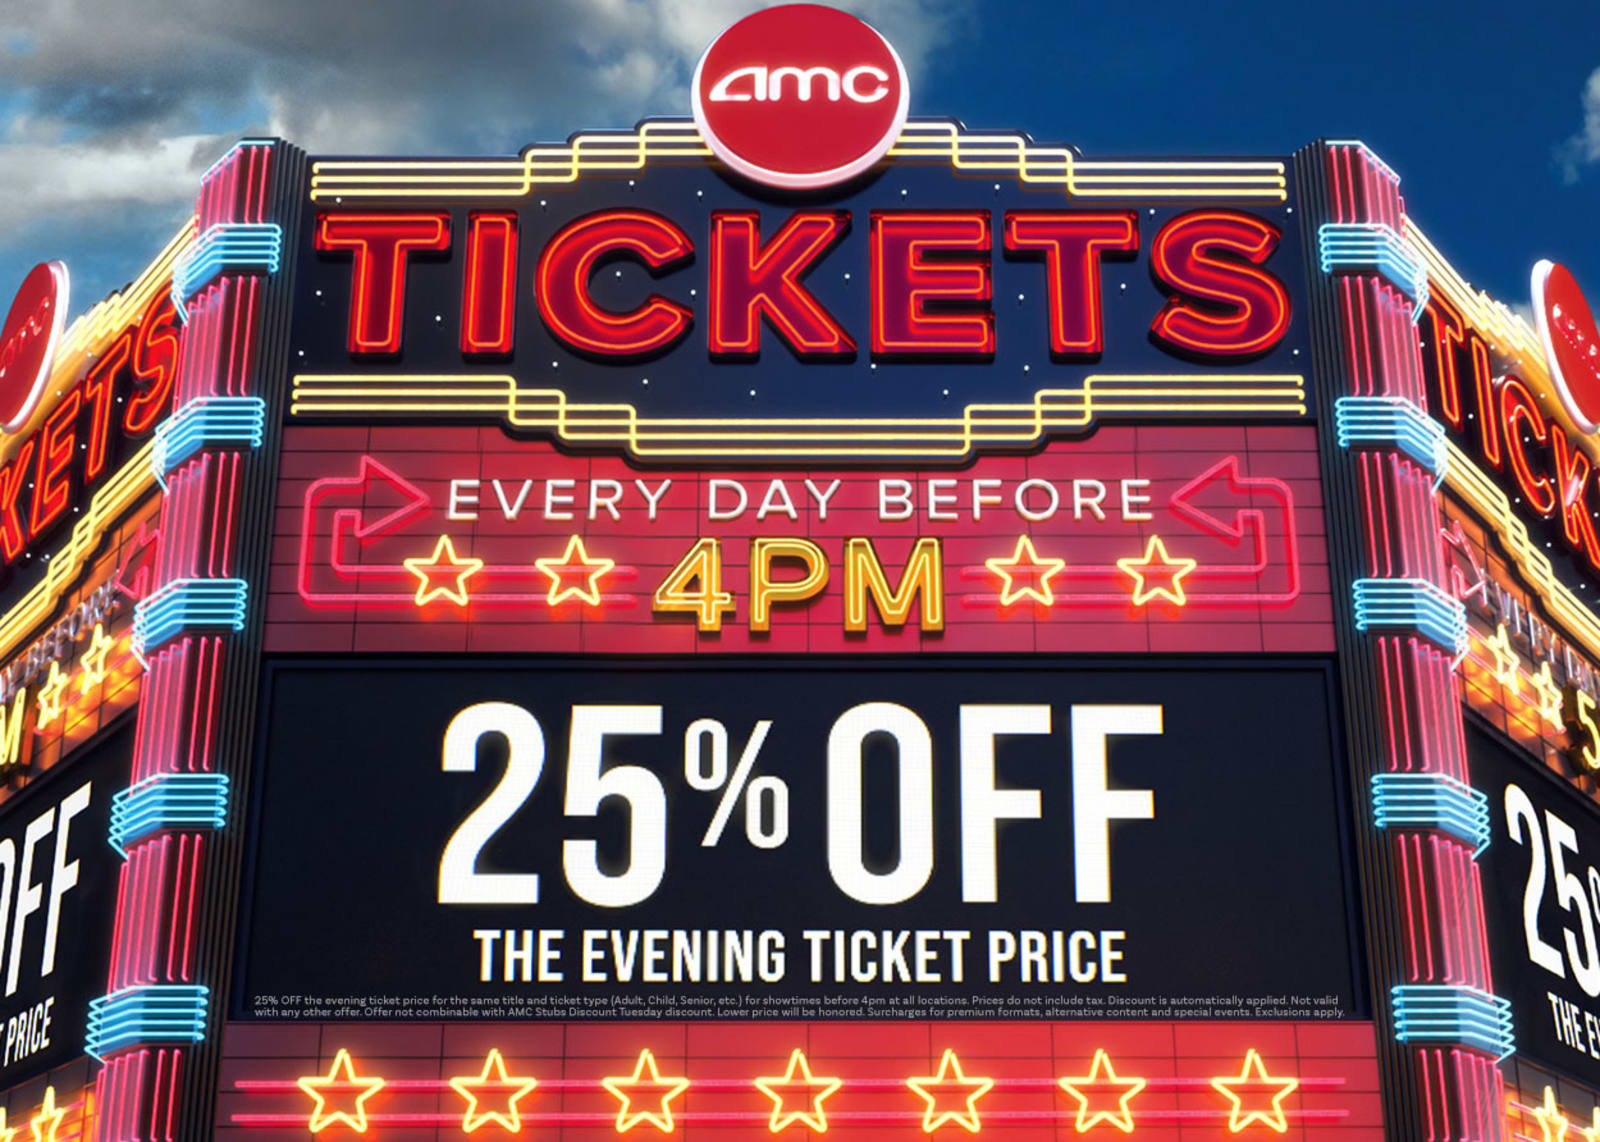 AMC Theater discounts make it one of the NJ cheap movie theaters near me.